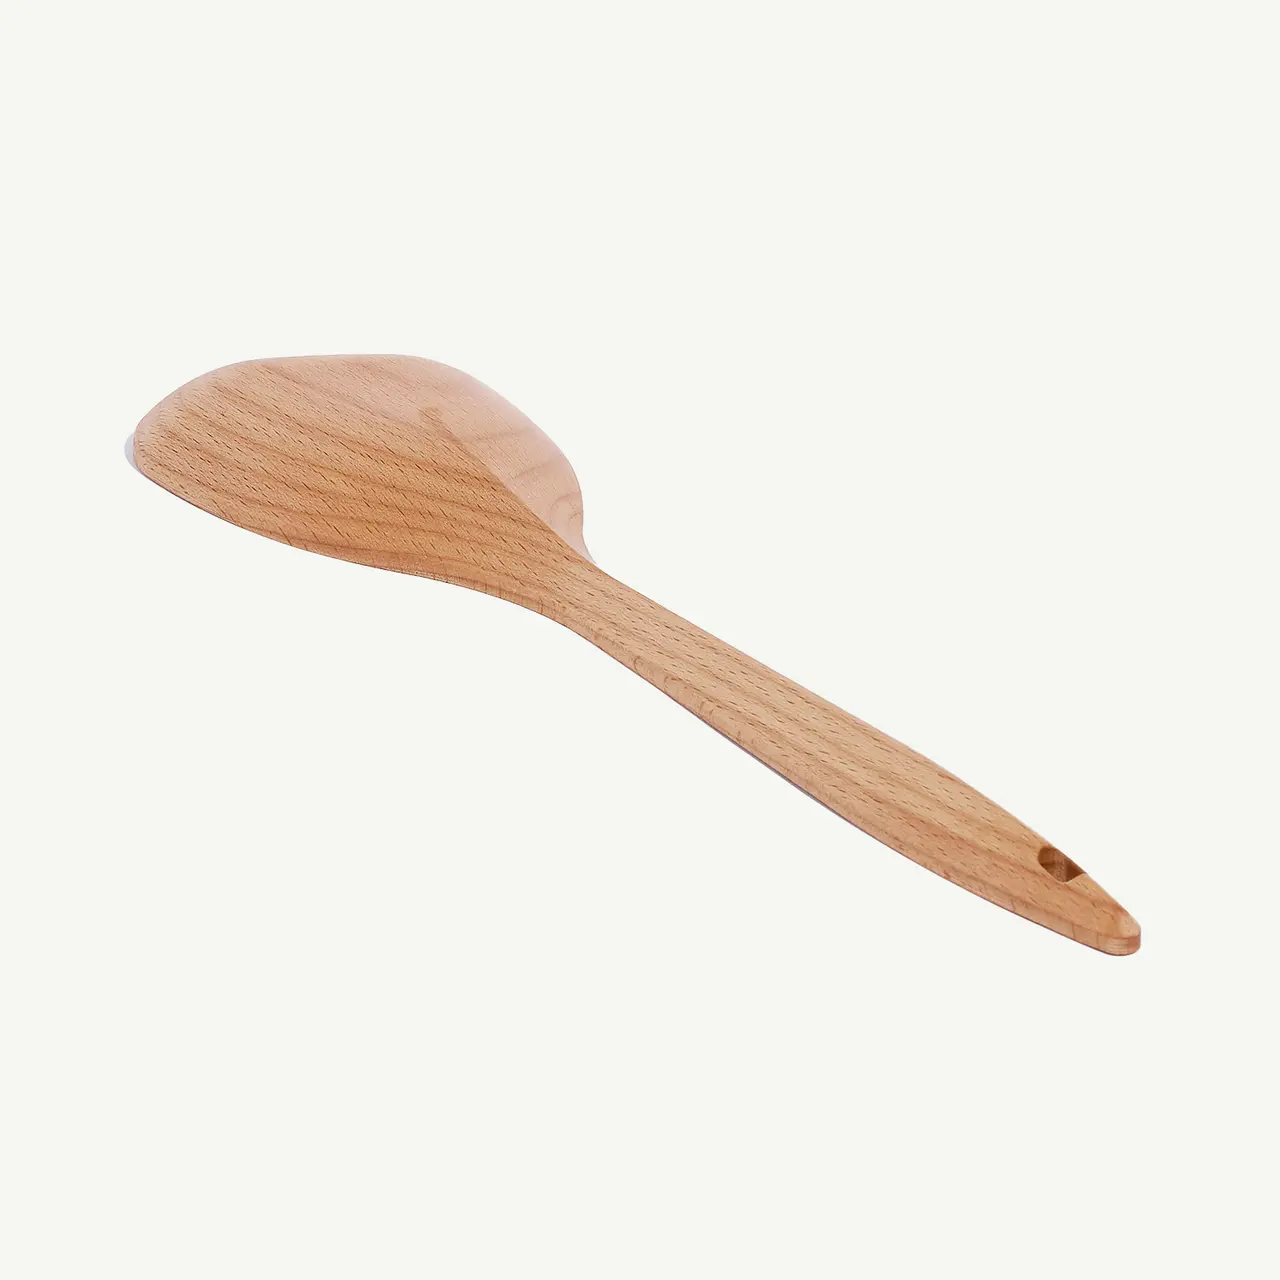 A wooden spoon is isolated against a plain white background.